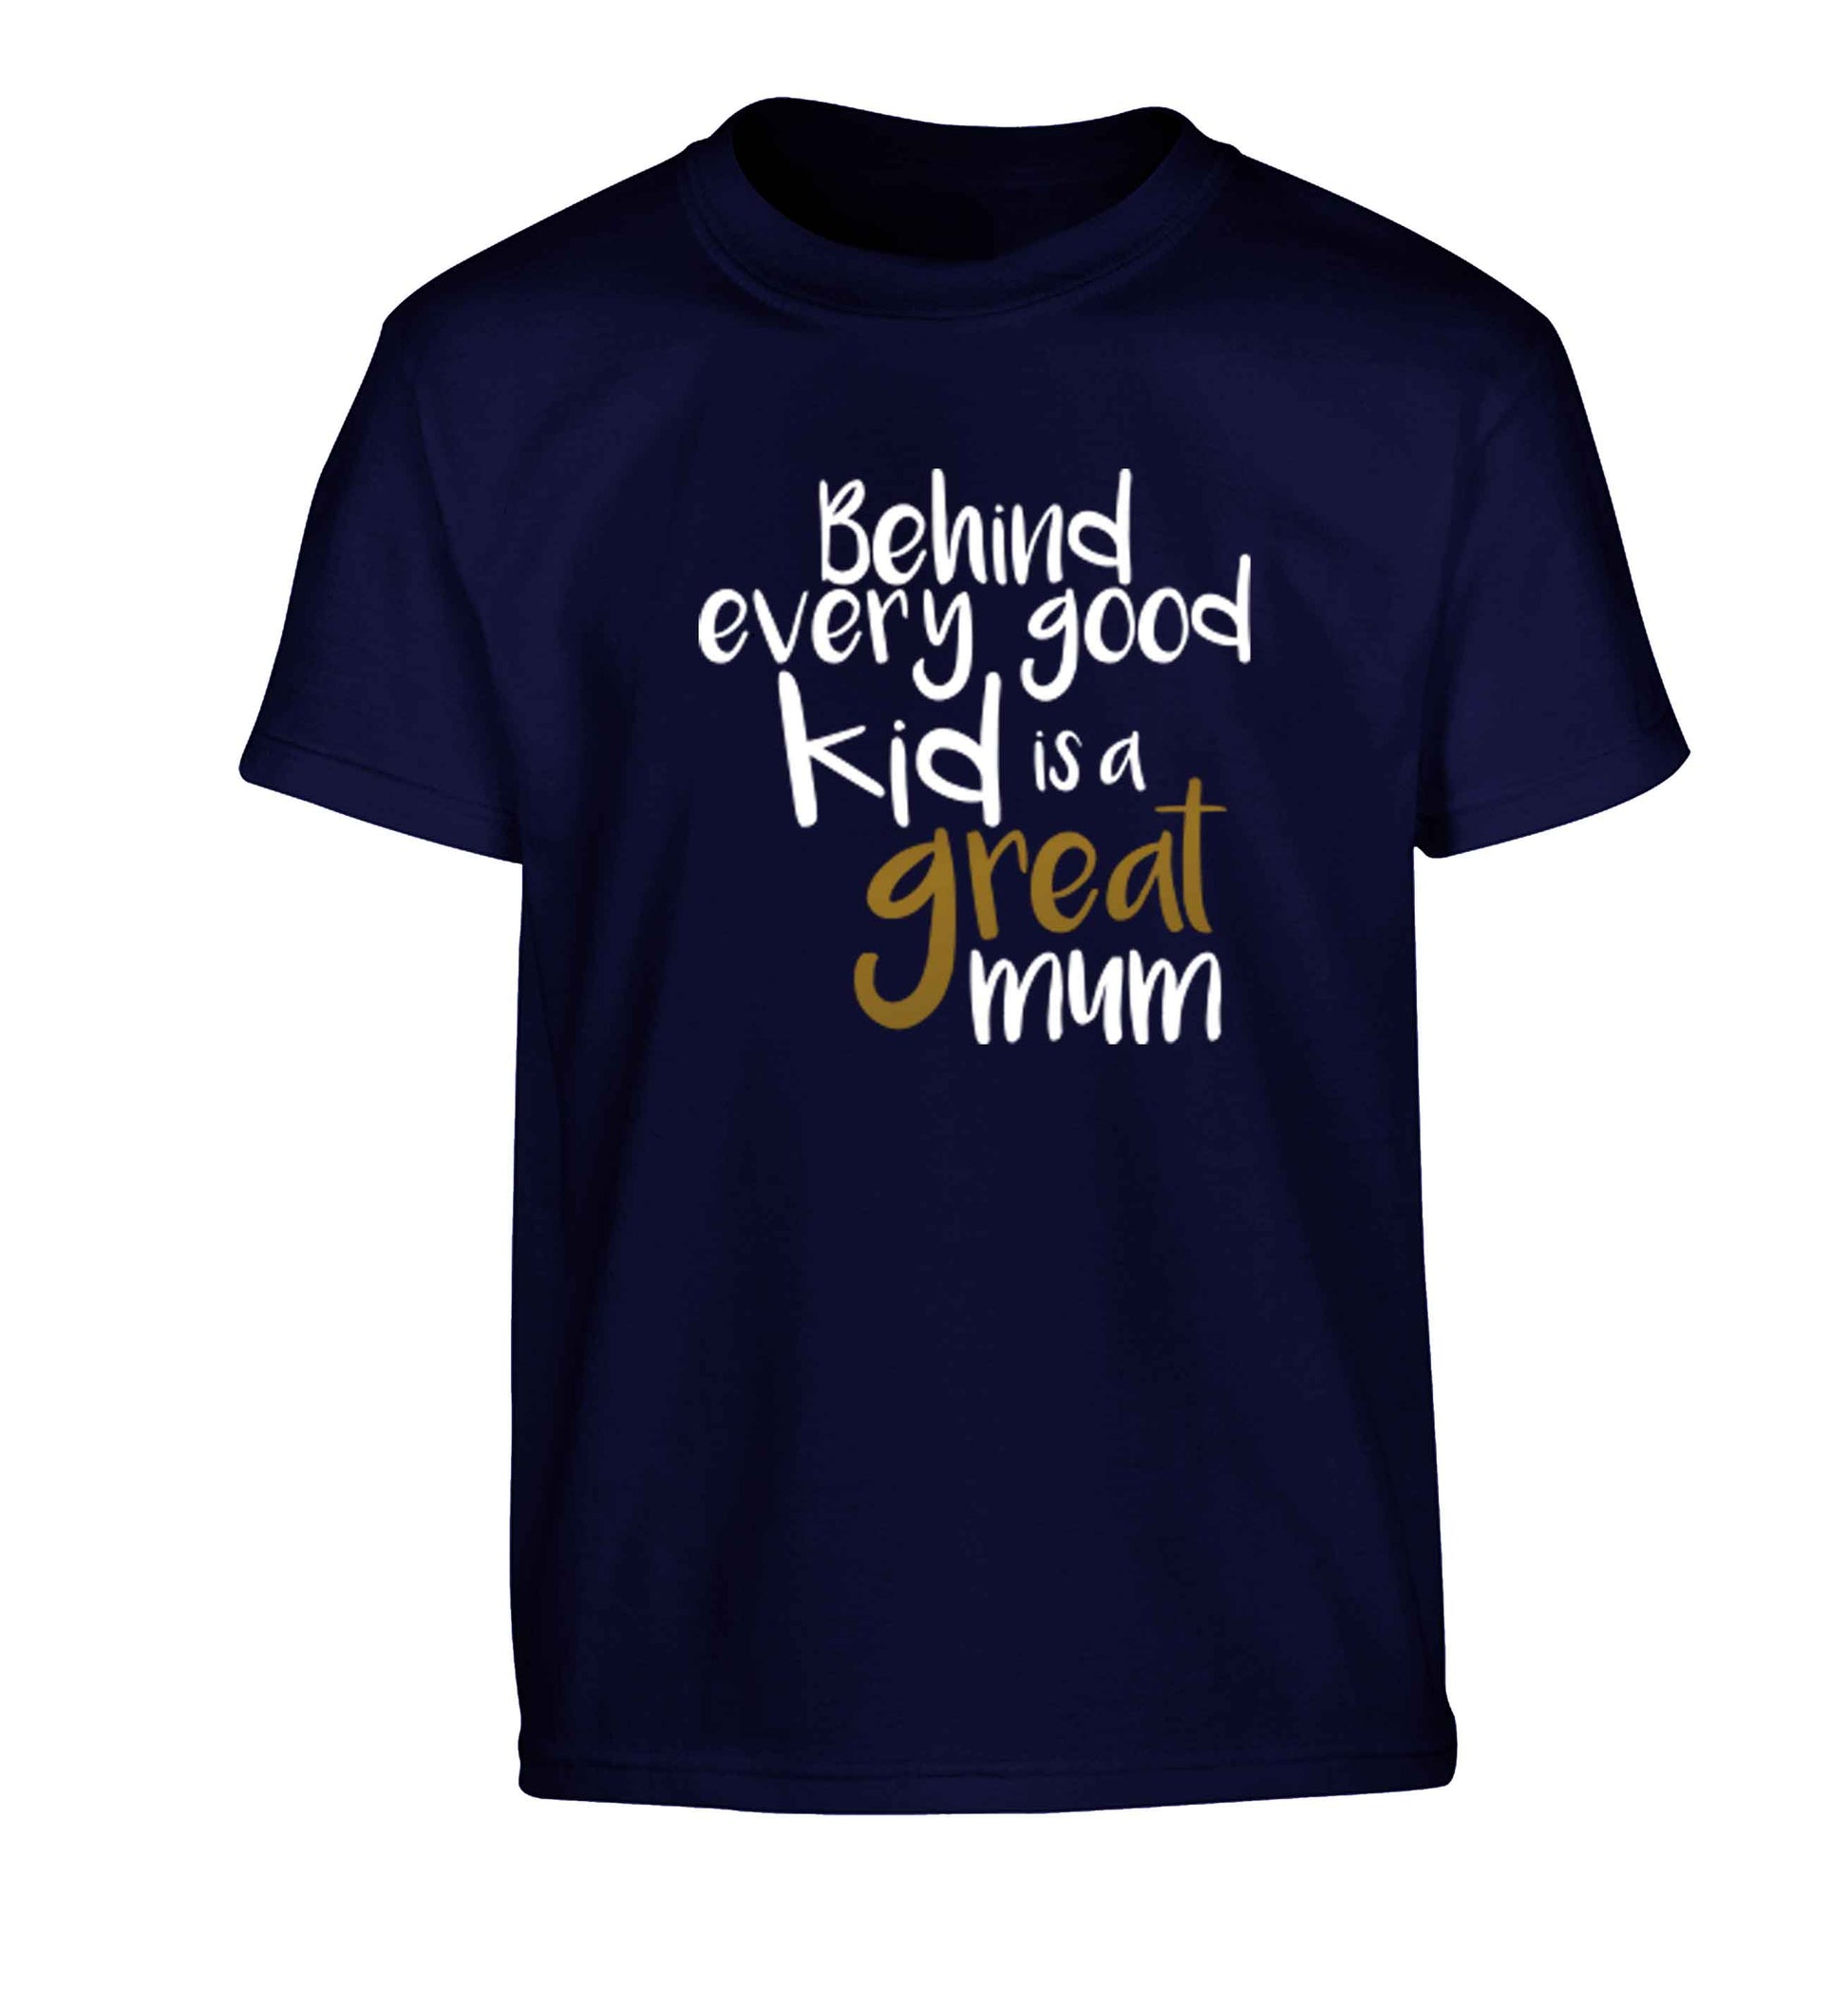 Behind every good kid is a great mum Children's navy Tshirt 12-13 Years